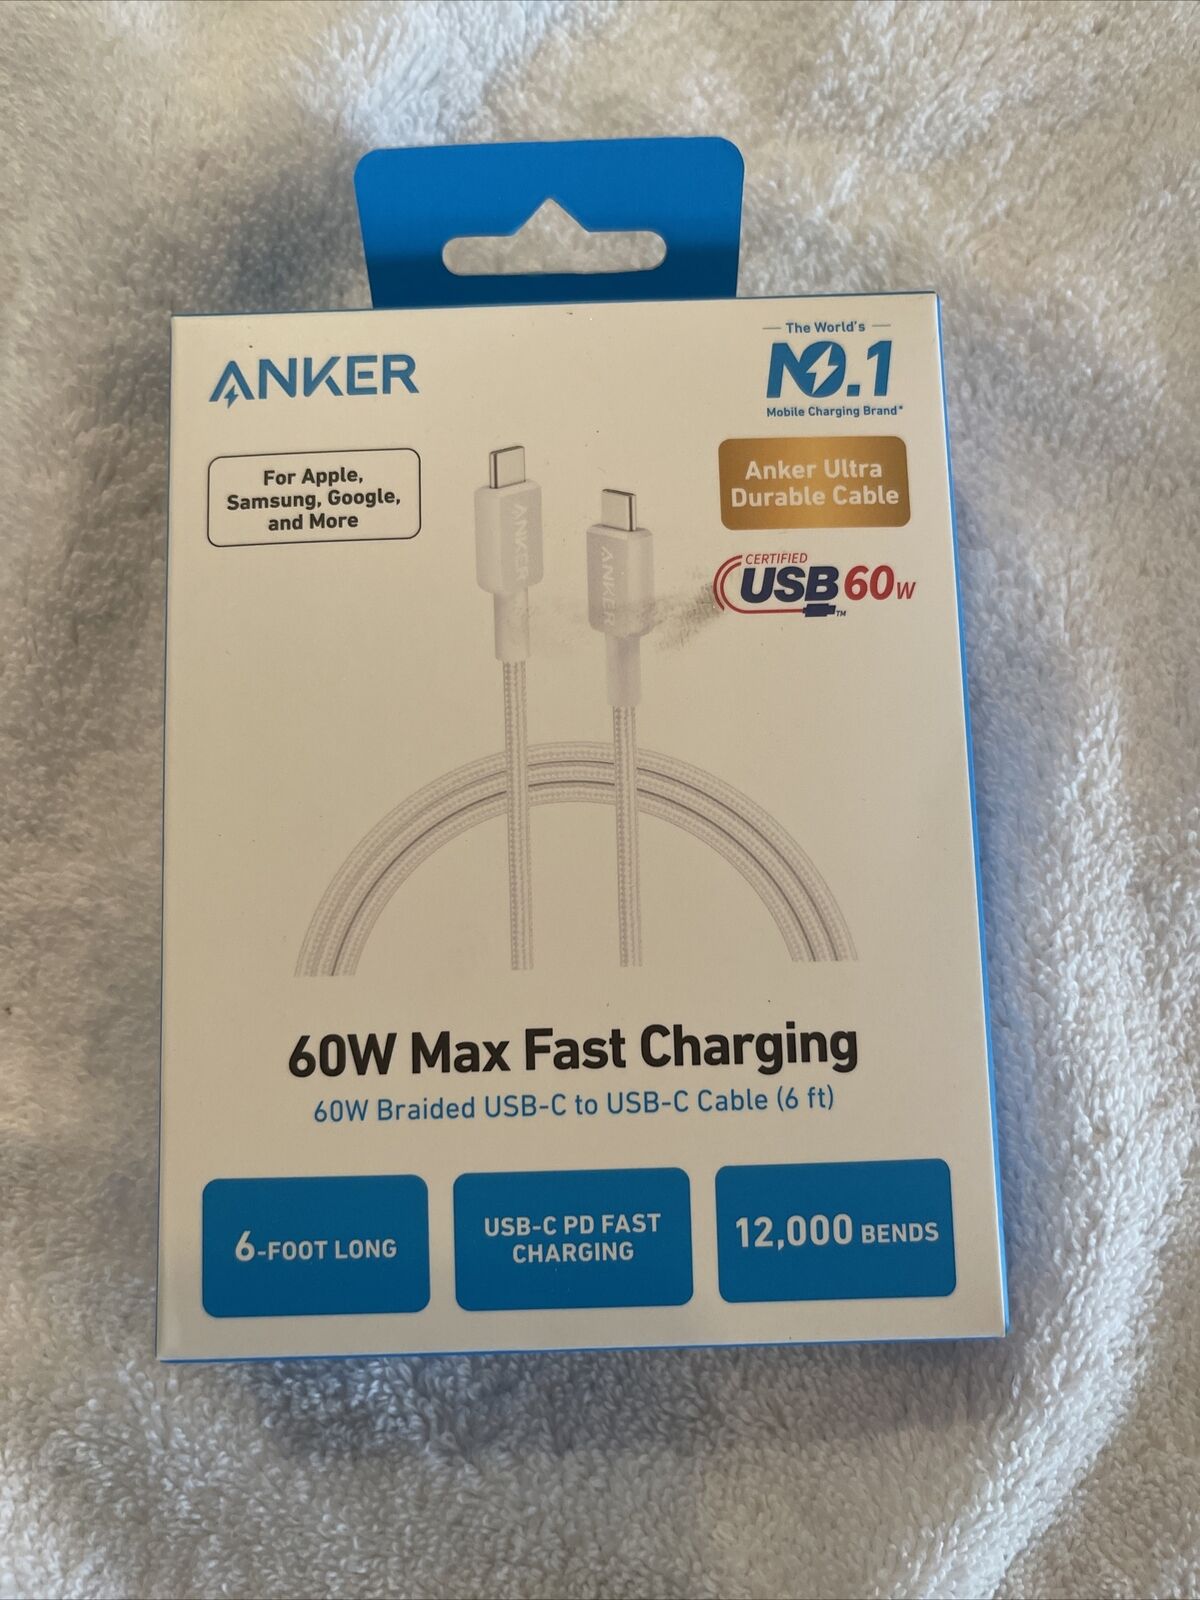 Anker 6' 60W Braided USB-C to USB-C Max Fast Charging Cable - White